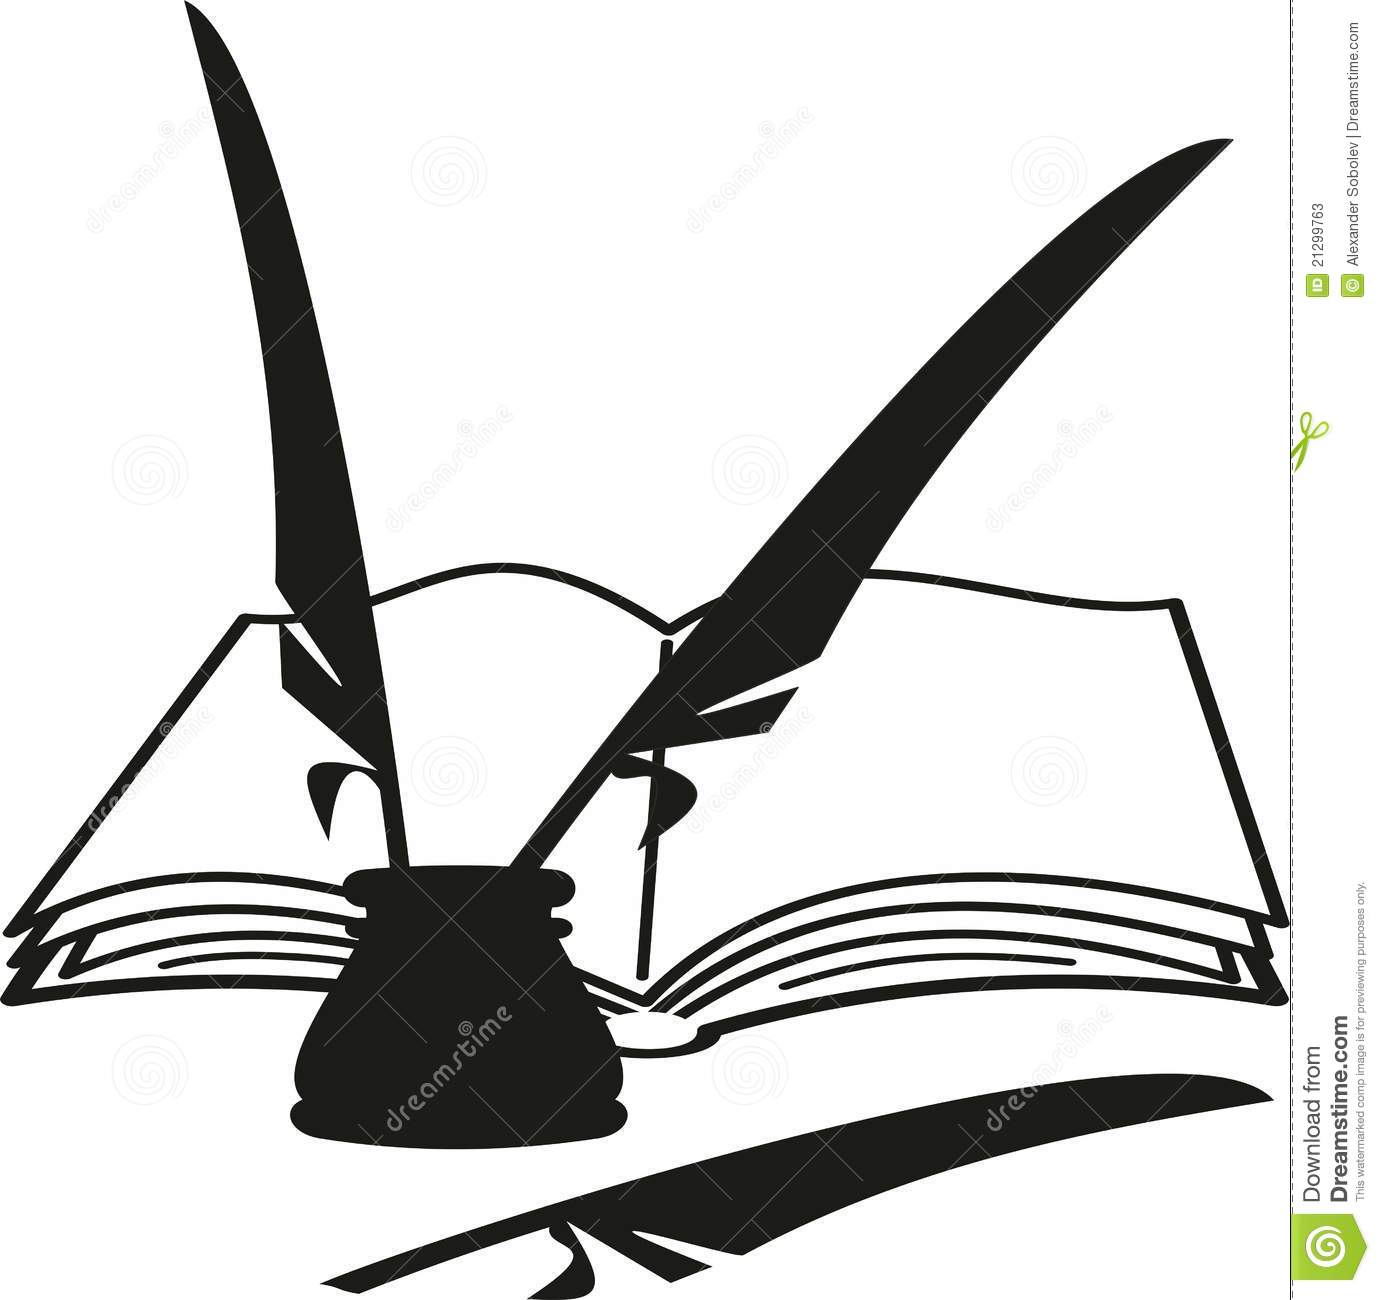 Cartoon Book Inkwell And Feathers  Quill  Stock Photos   Image